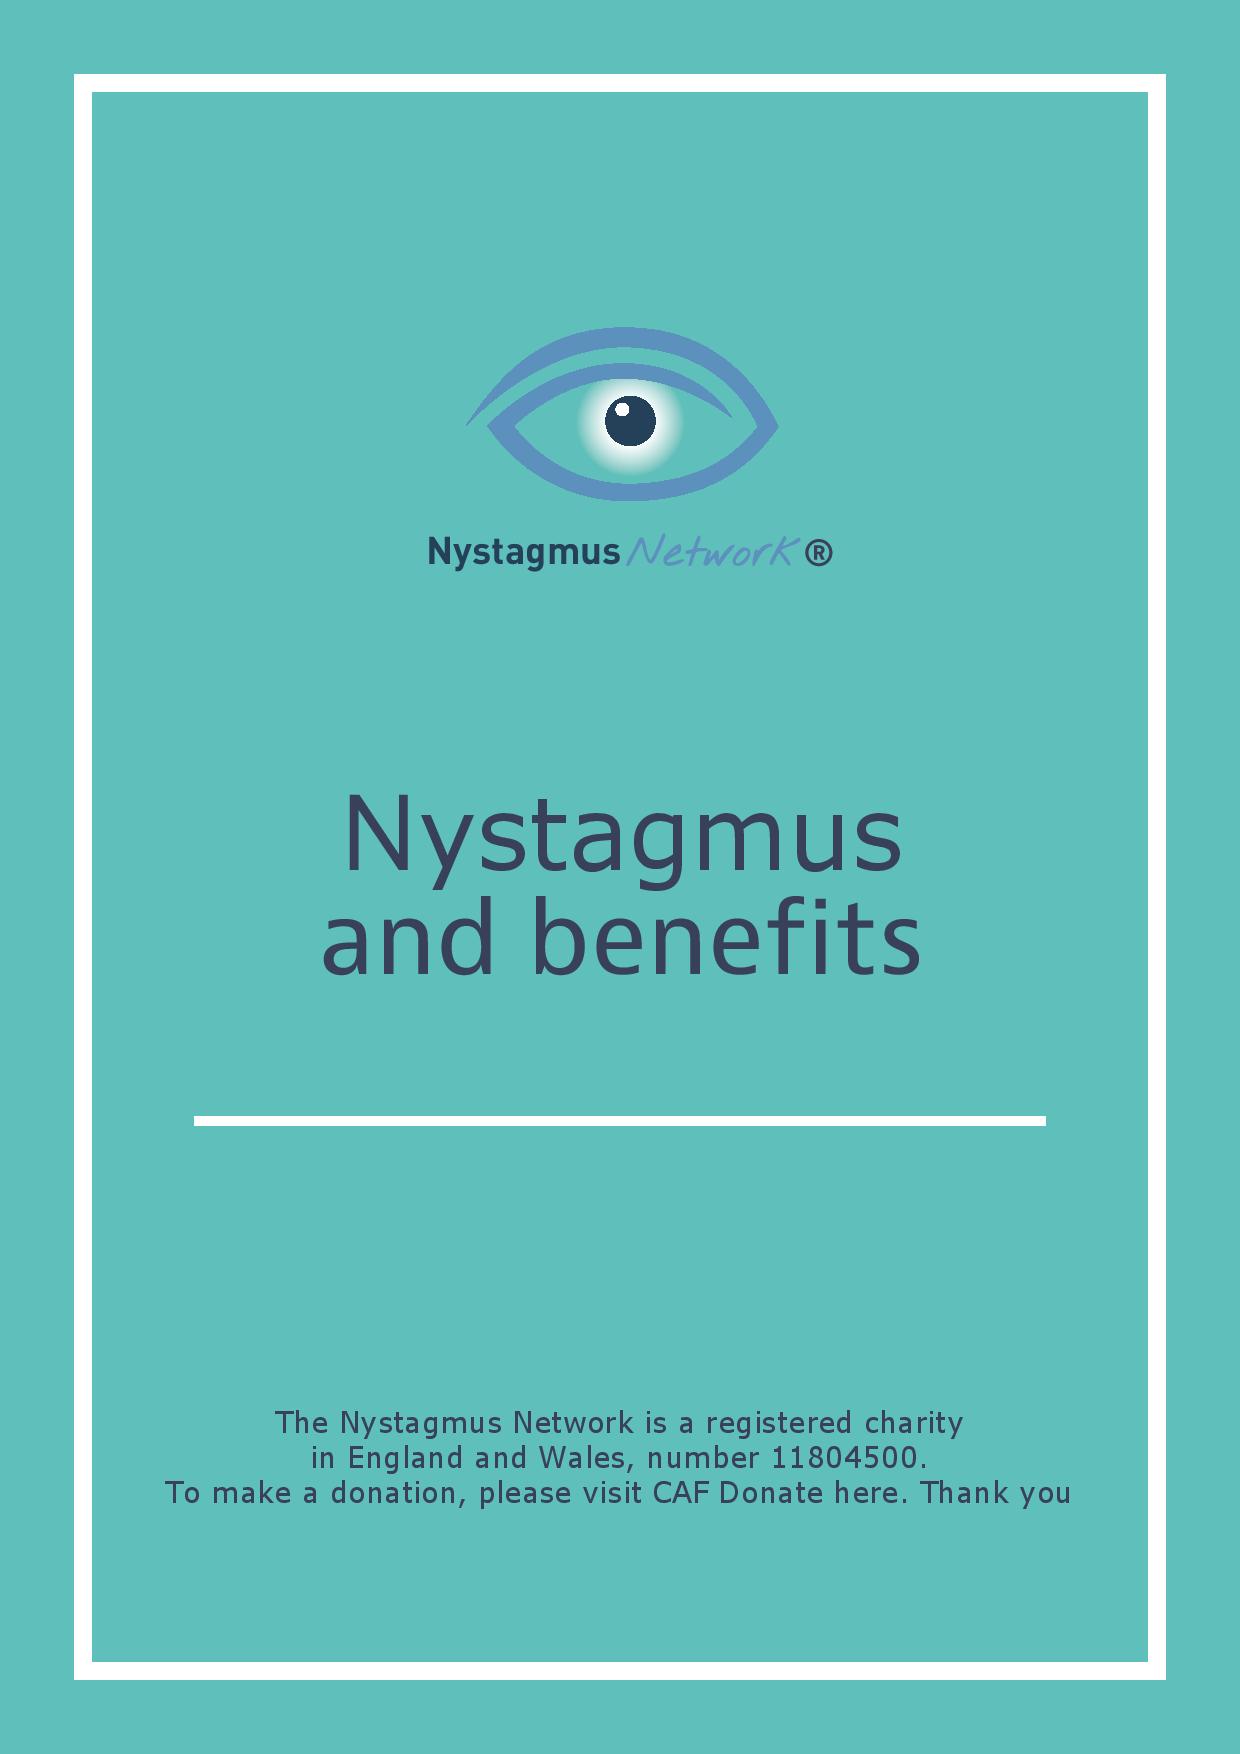 The front cover of the BNystagmus Network guide to nystagmus and benefits.